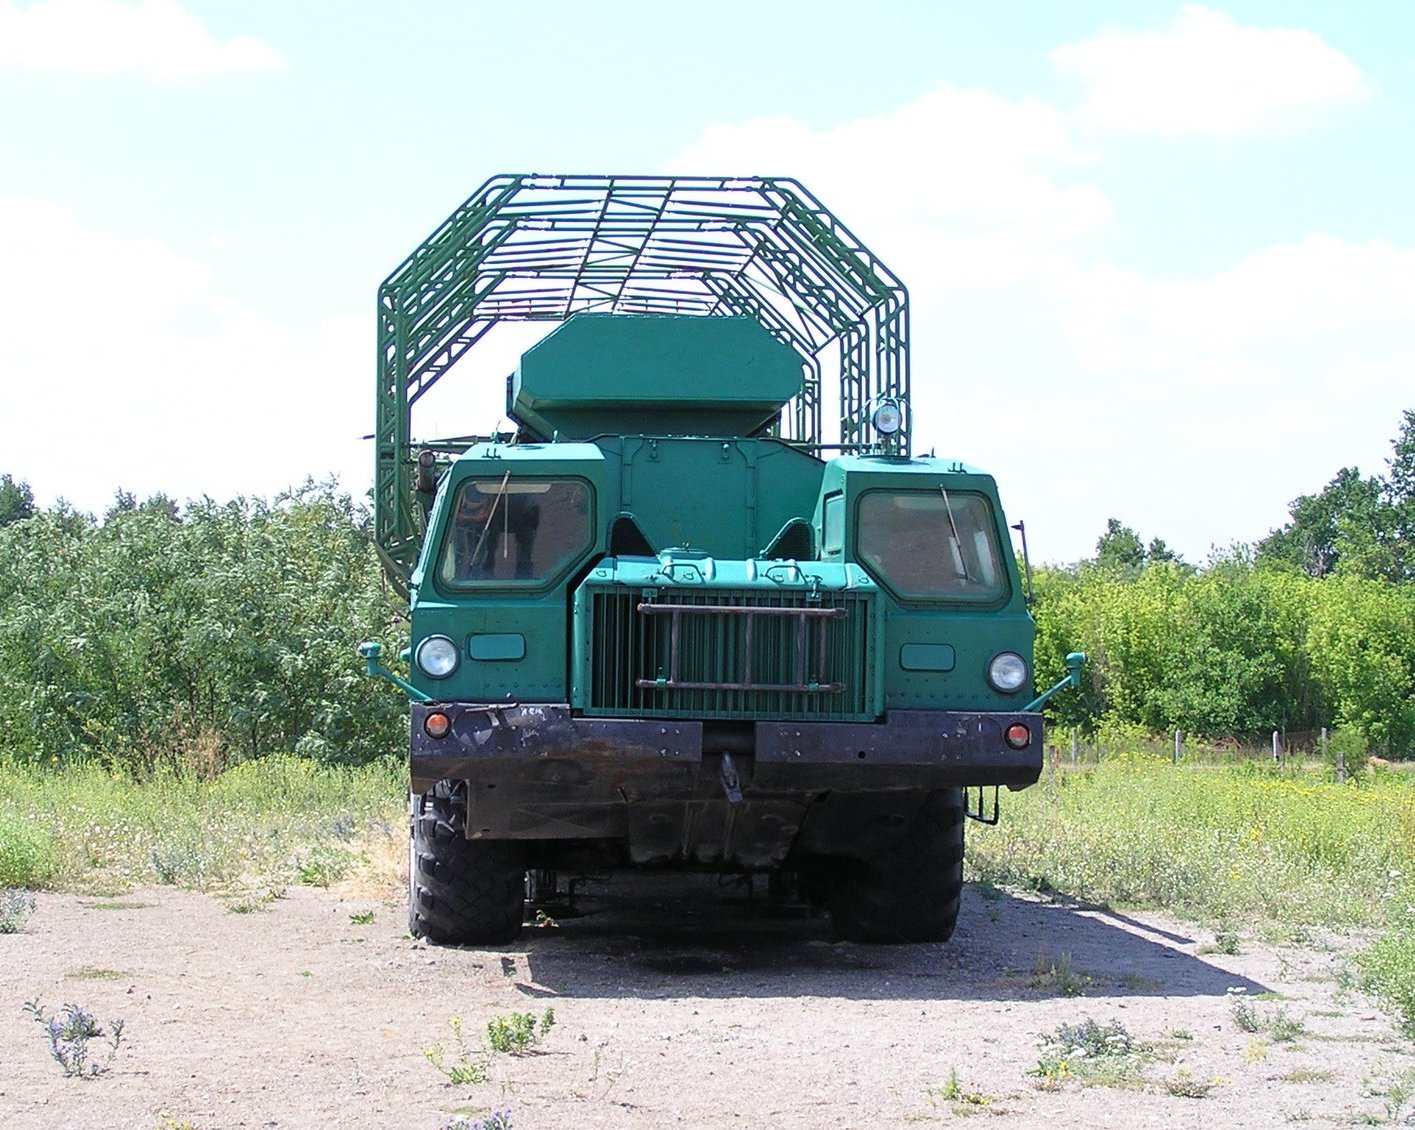 File:MAZ-543 special purpose truck, Strategic Missile Forces ...